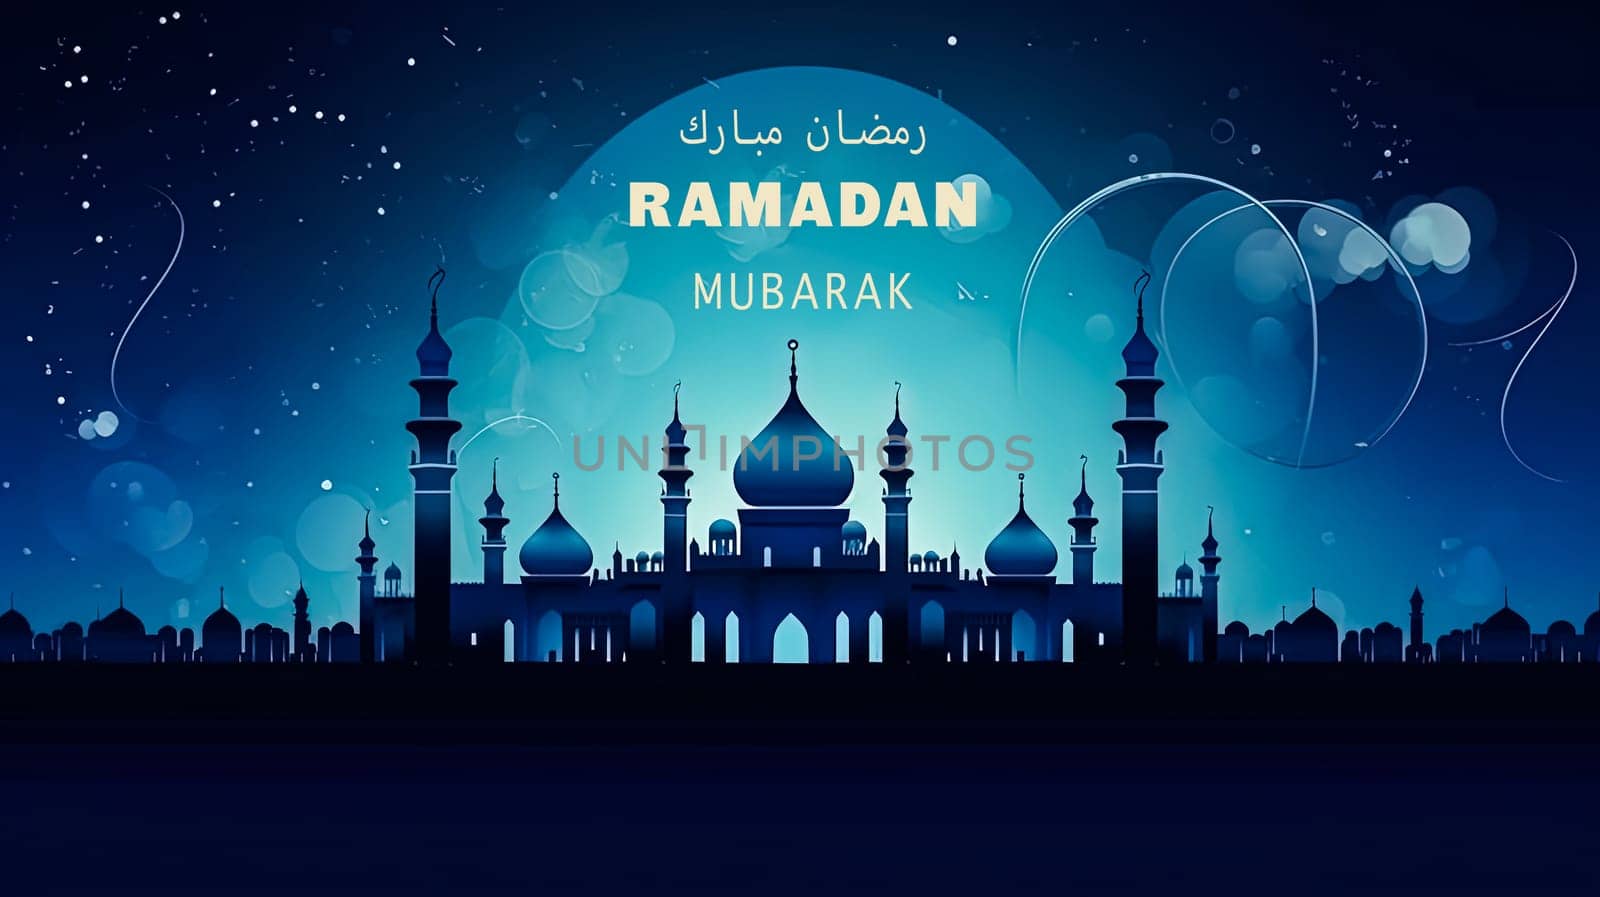 Ramadan radiance, A mosque bathed in warm hues, a visual embrace of celebration and wishes for a blessed Ramadan capturing the spiritual glow.